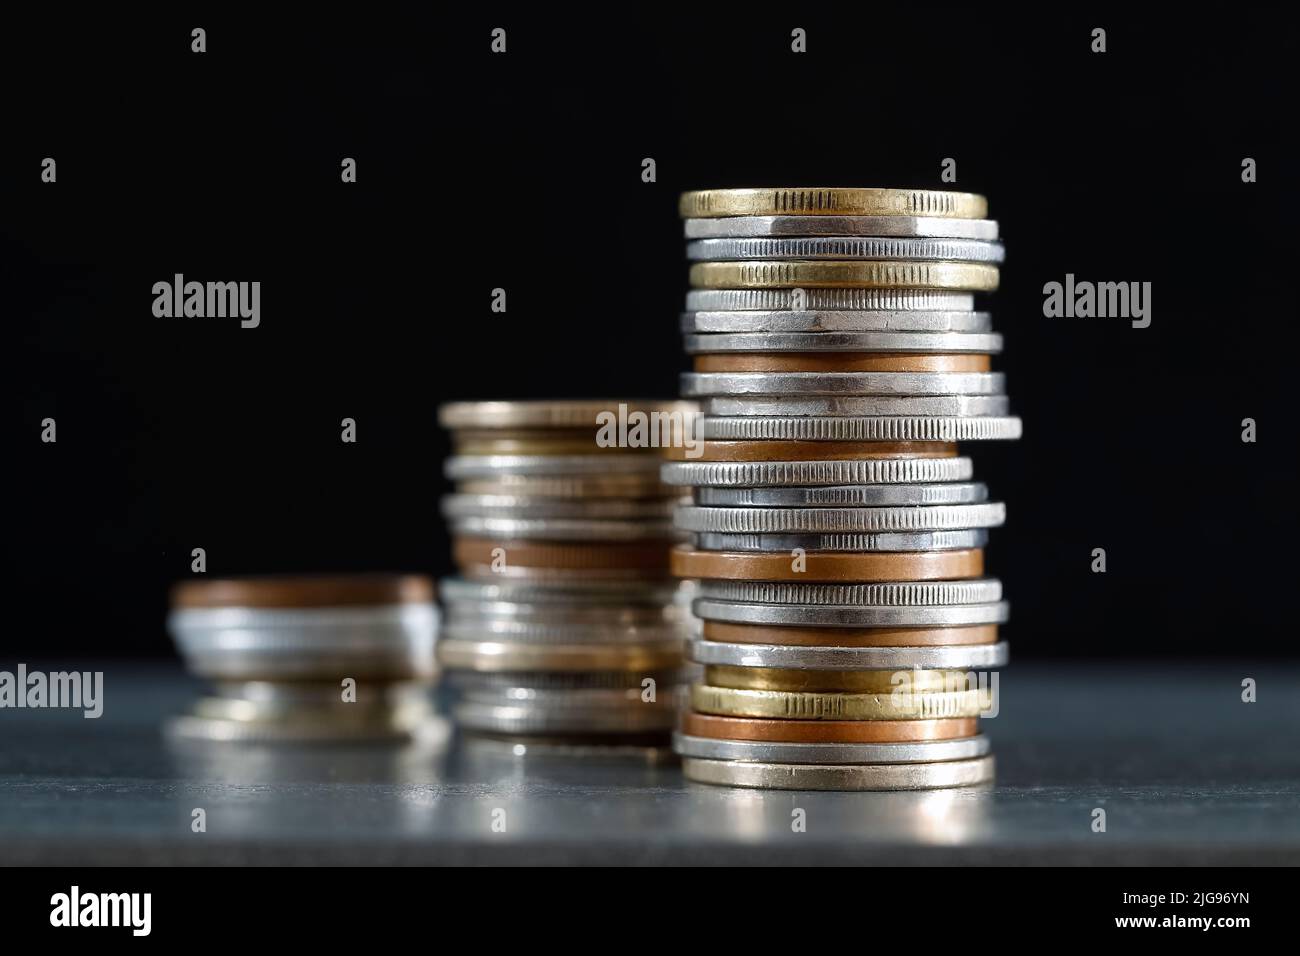 Money, in this case group of various stacked coins, represents an improvement in the economic situation. Stock Photo